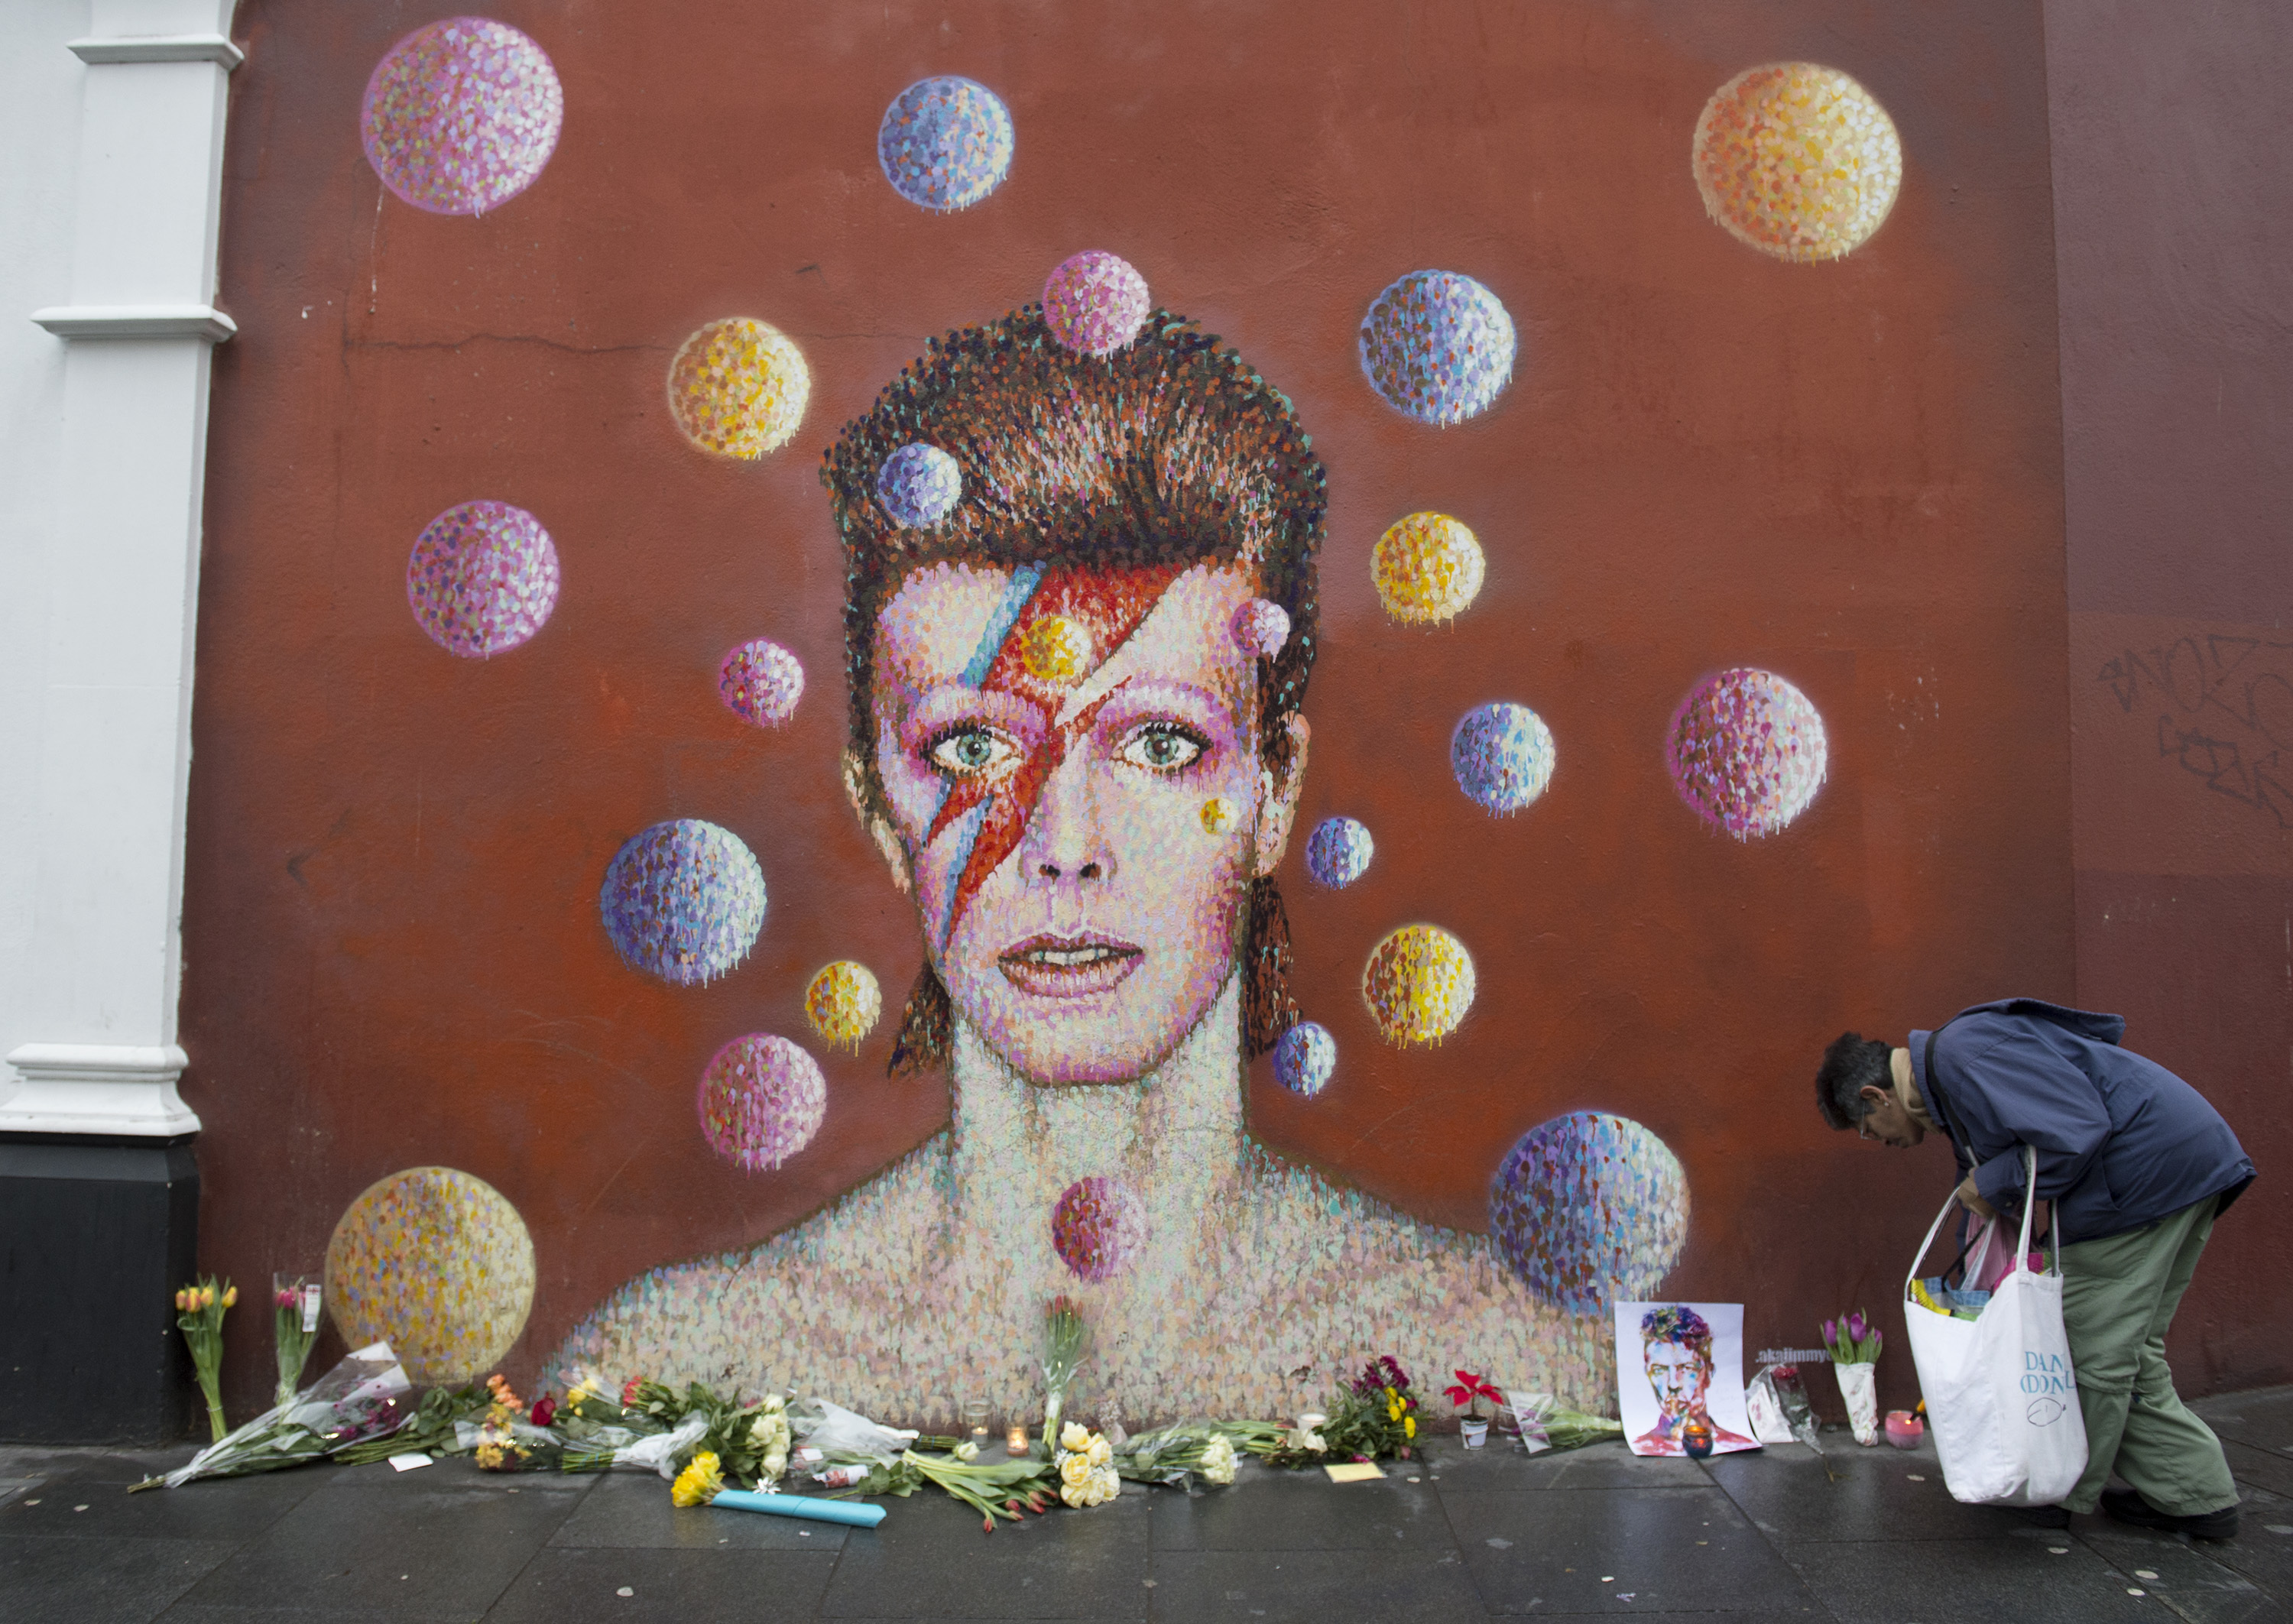 Bowie's mural in Brixton